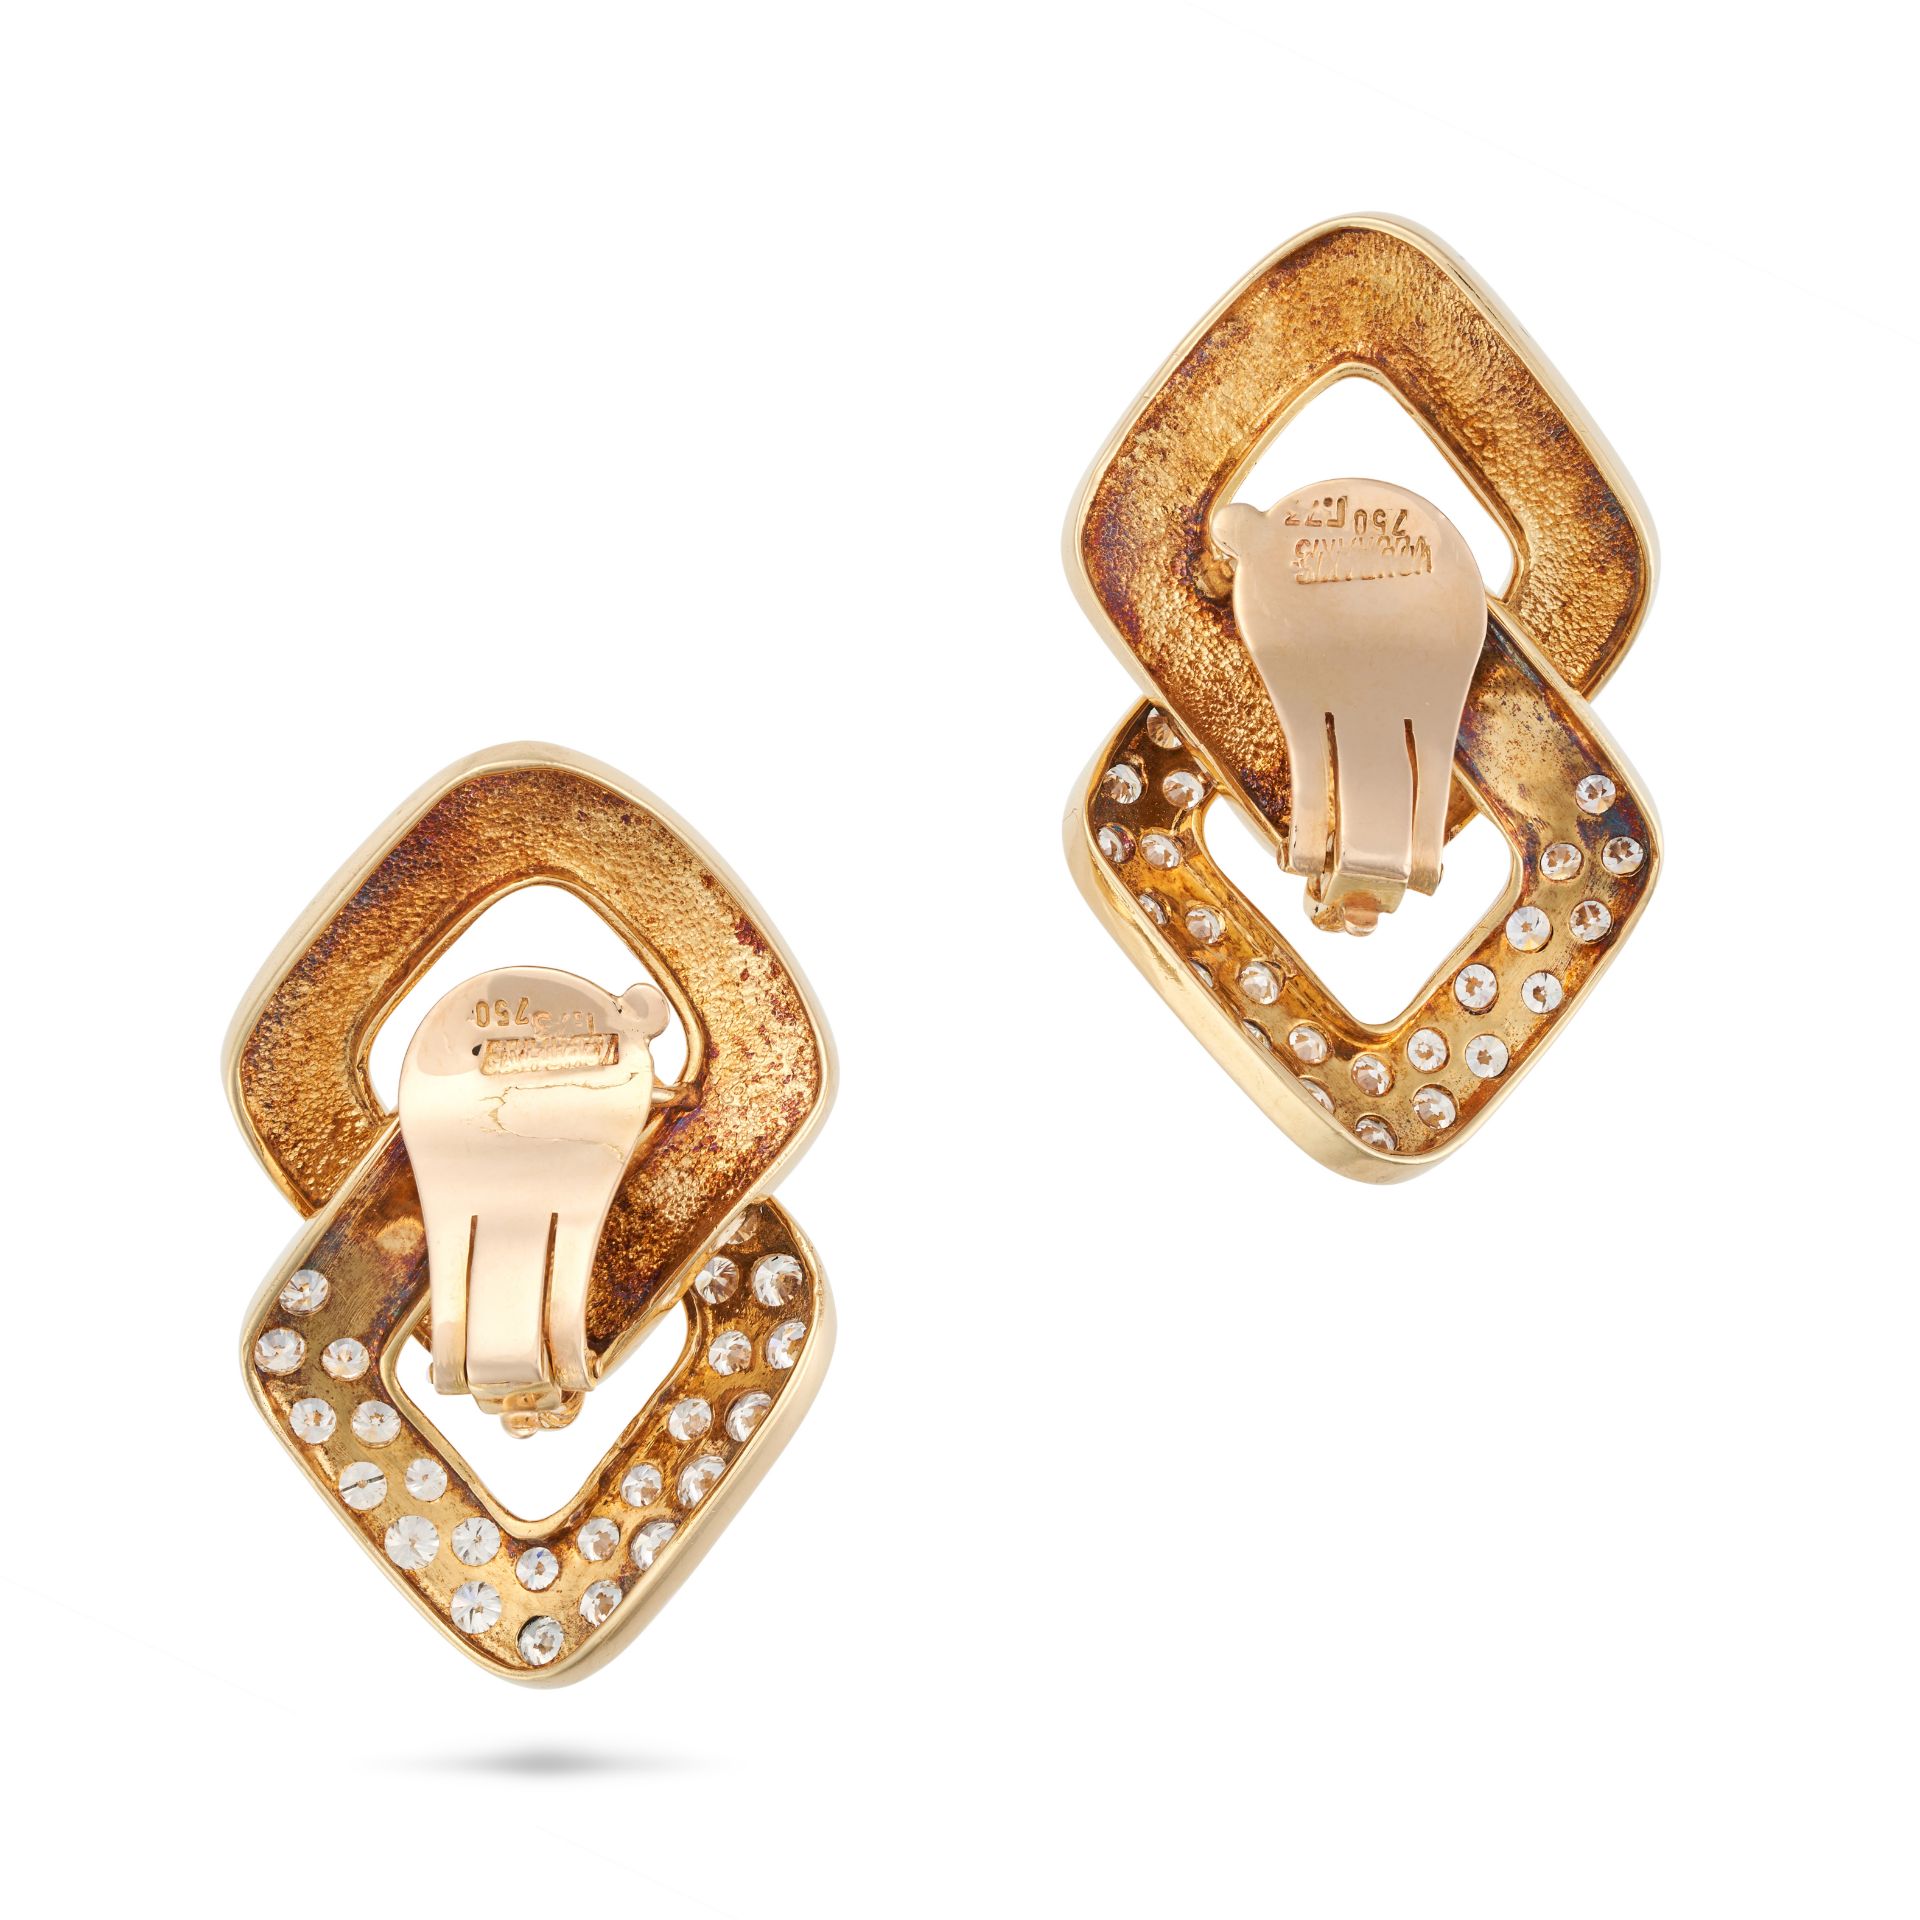 VOURAKIS, A PAIR OF DIAMOND CLIP EARRINGS each comprising two stylised interlocking links, one pa... - Image 2 of 2